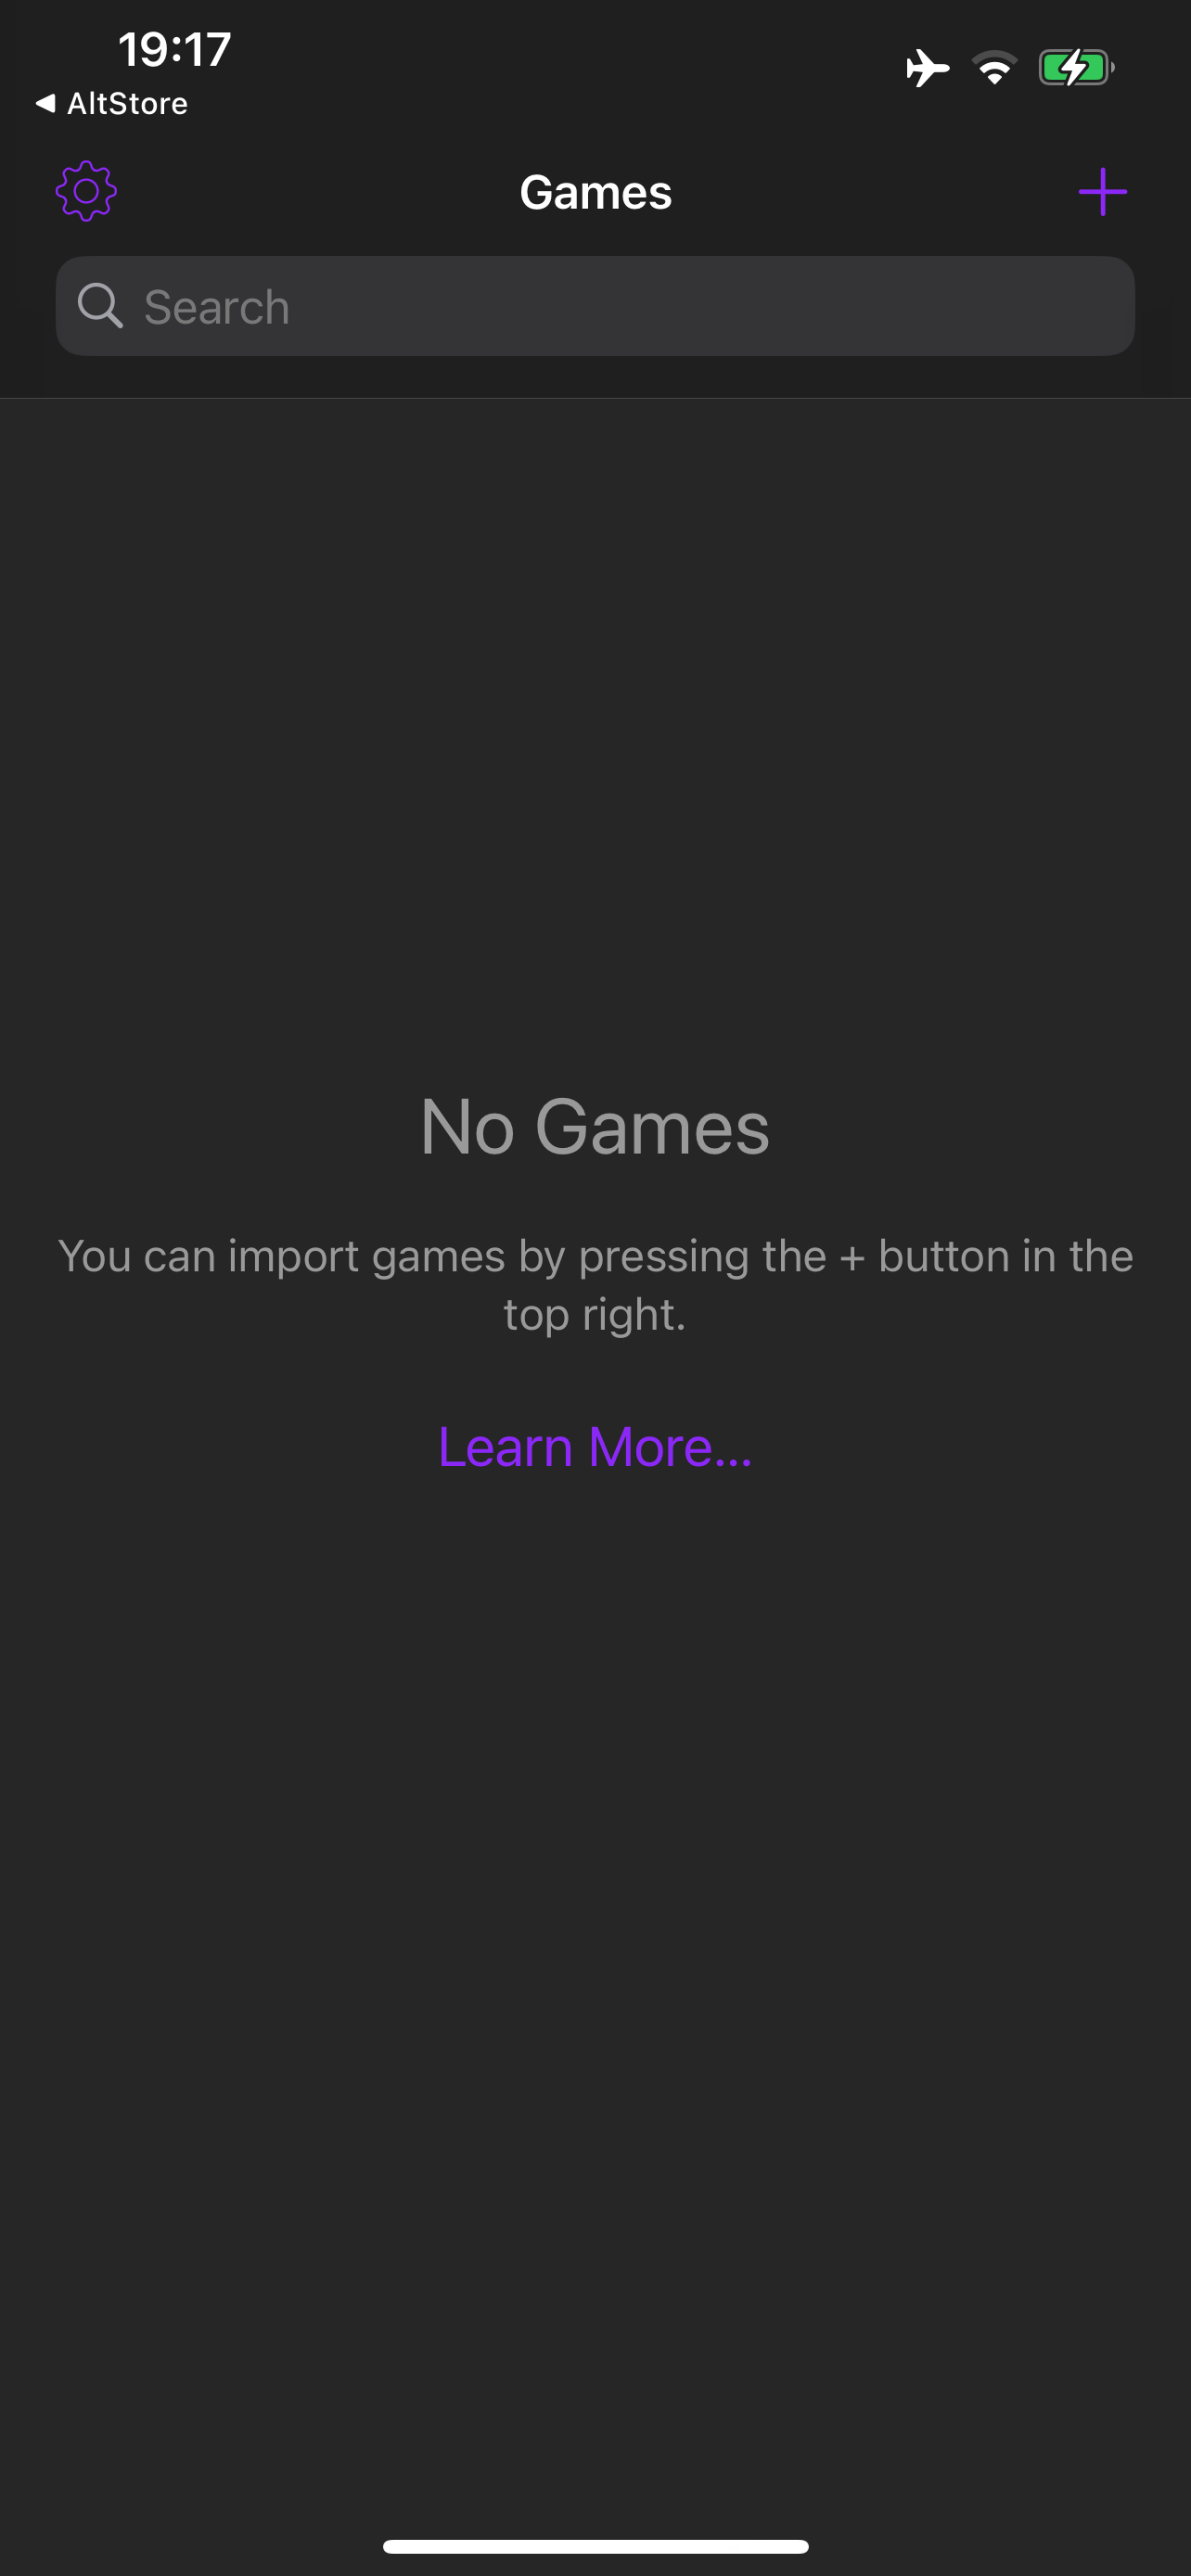 Delta app opened to its initial “No Games” screen.